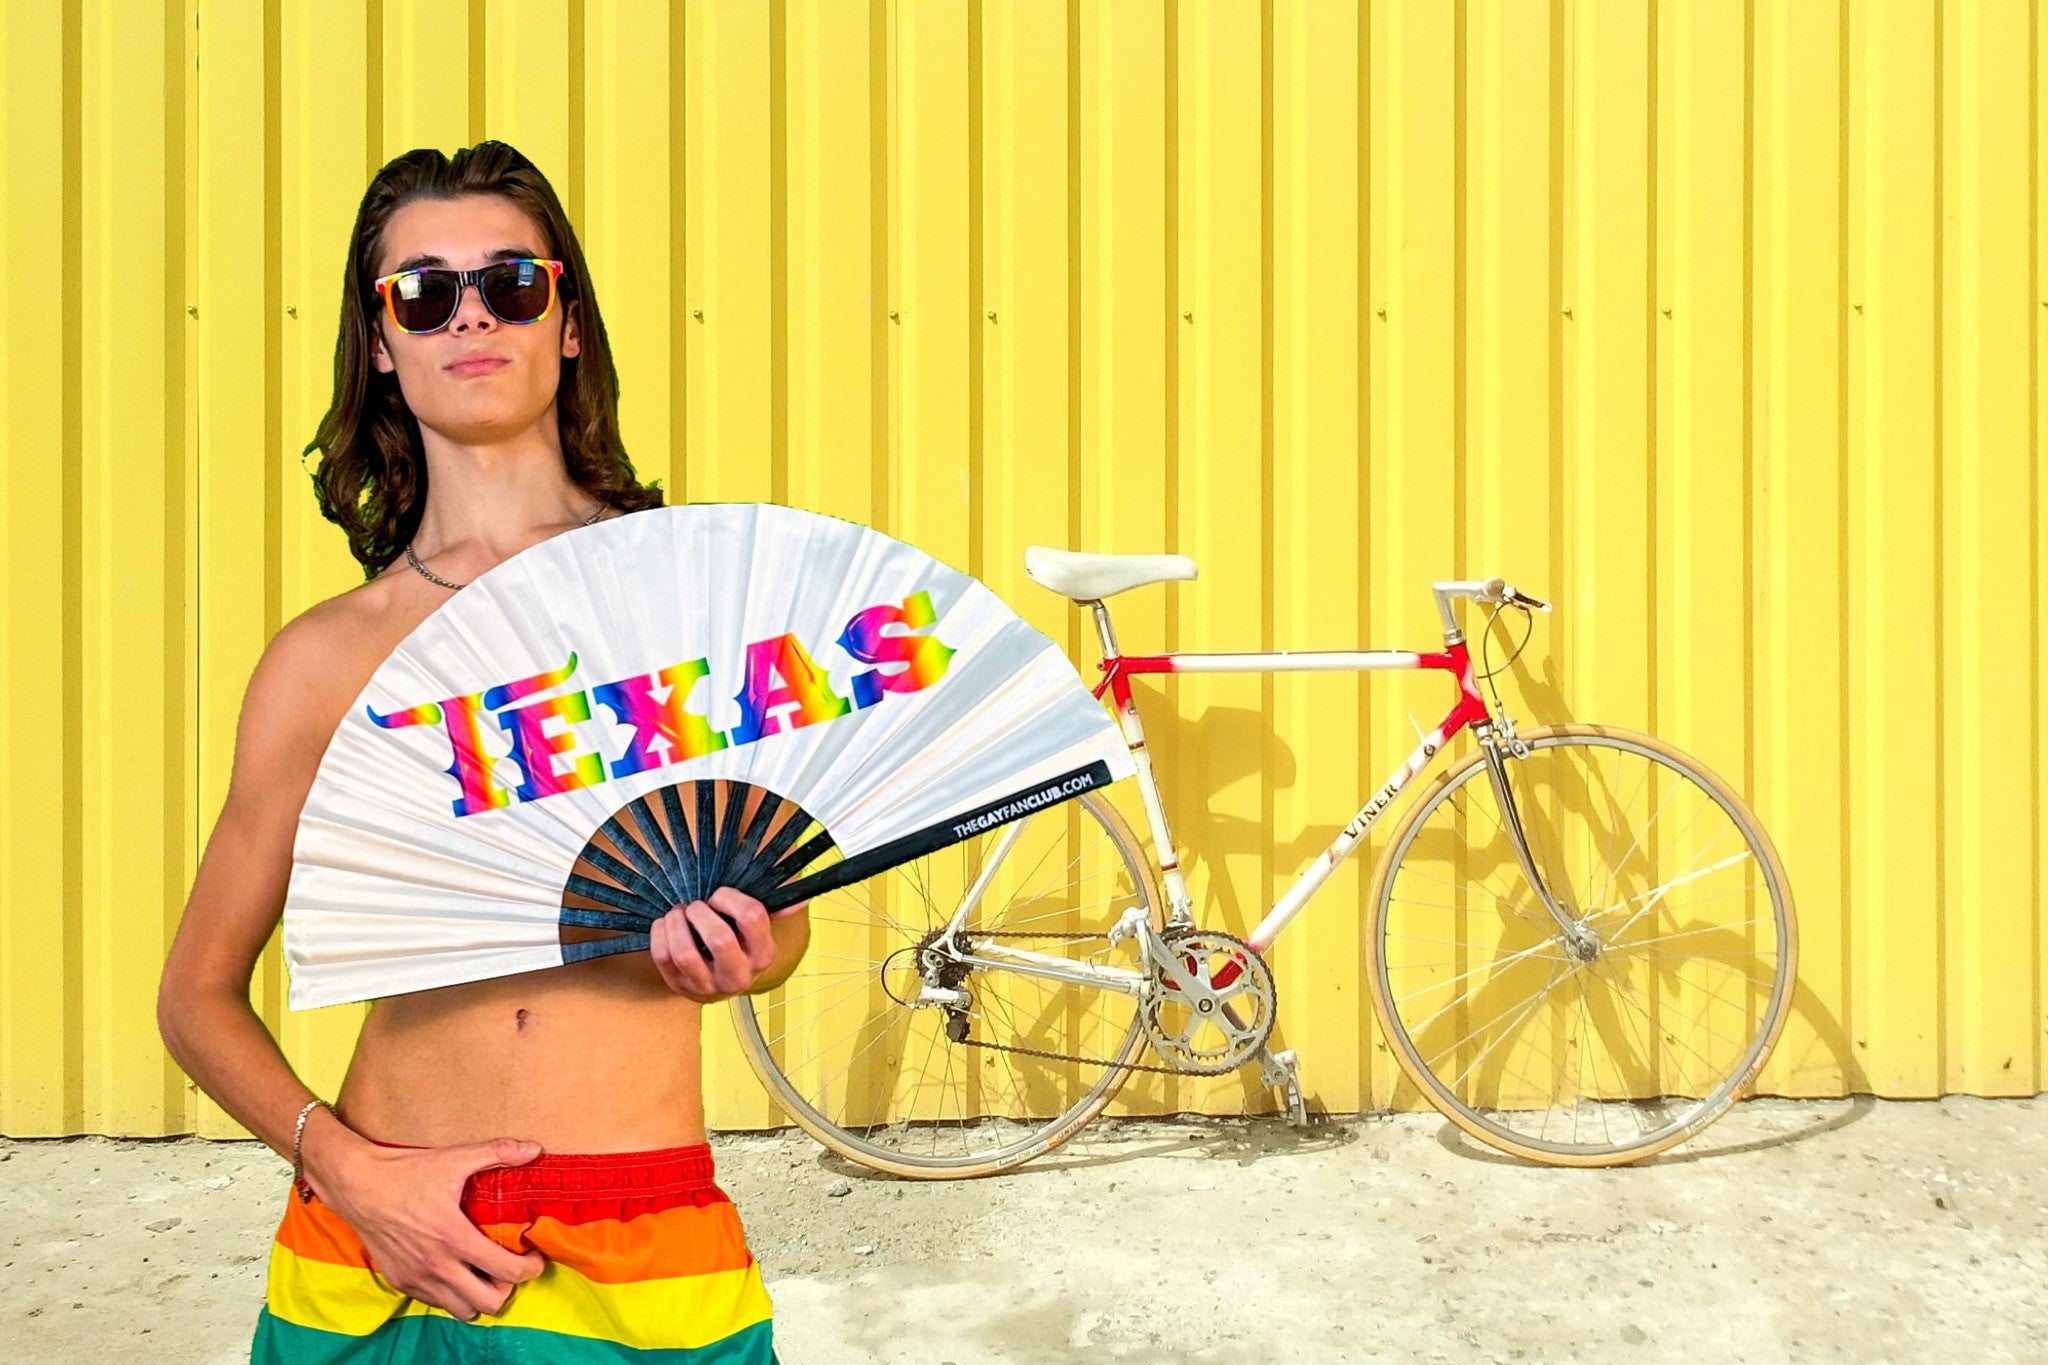 Texas Pride hand fans and Texas Pride T-Shirts